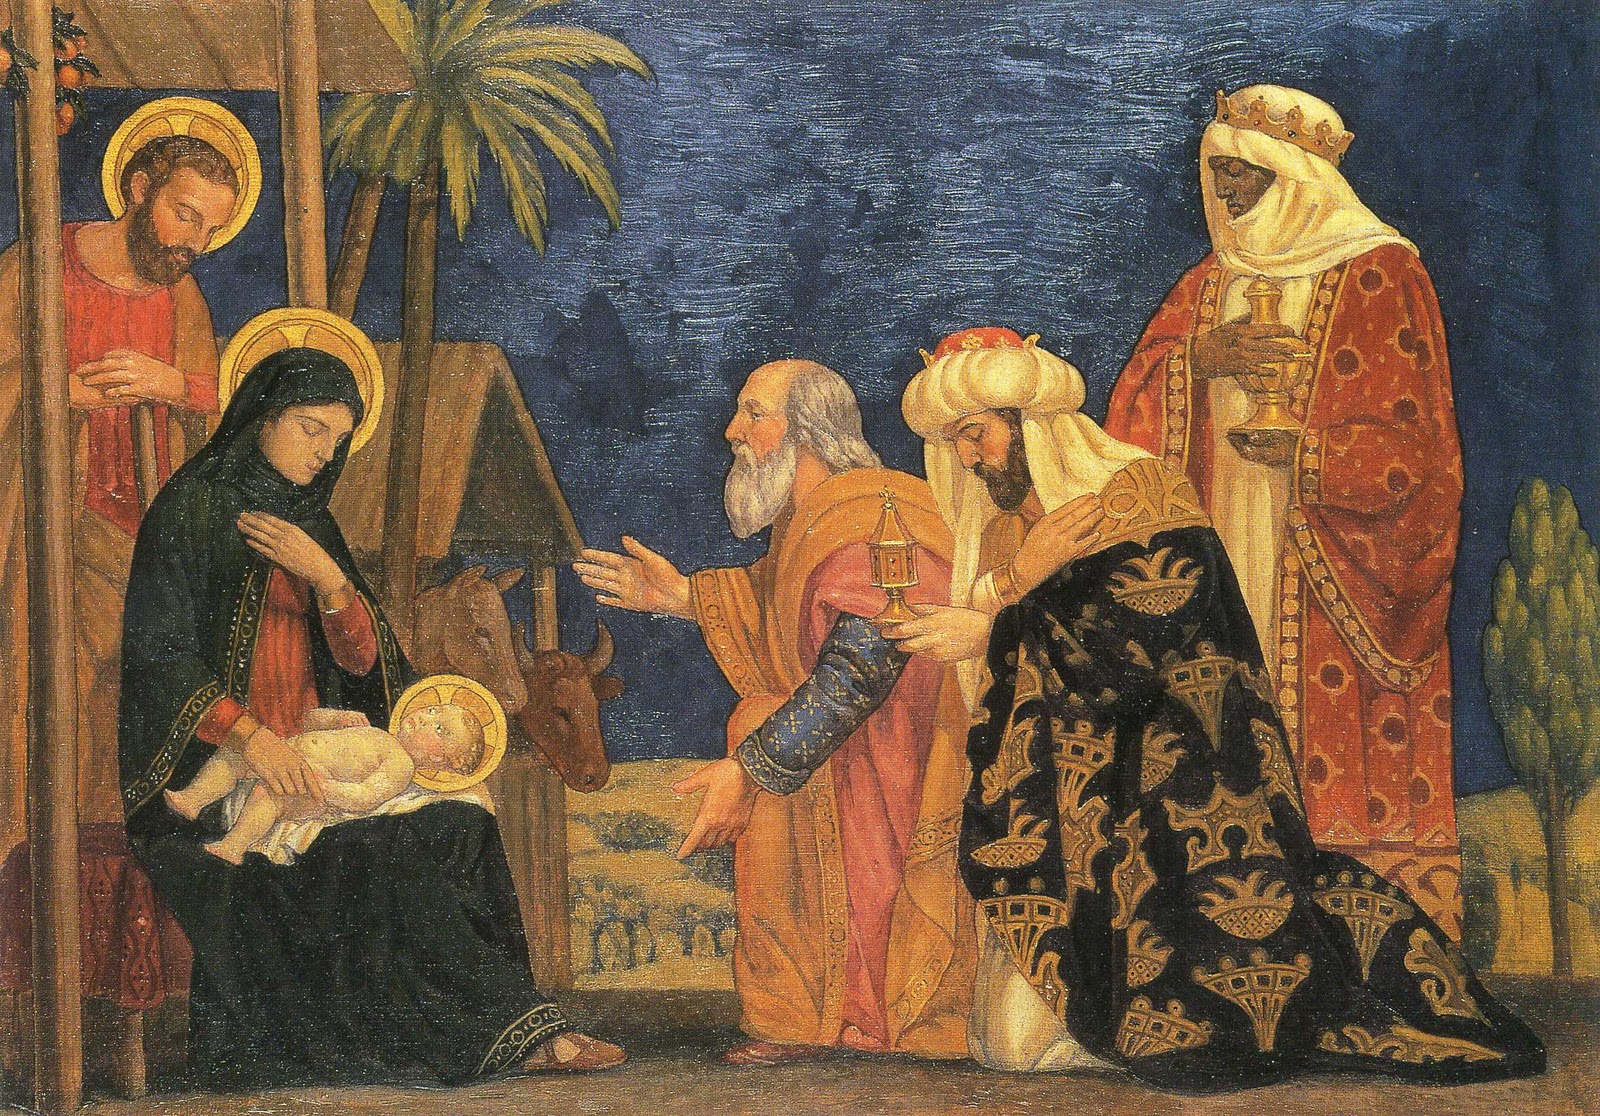 History As We Know It: We Three Kings